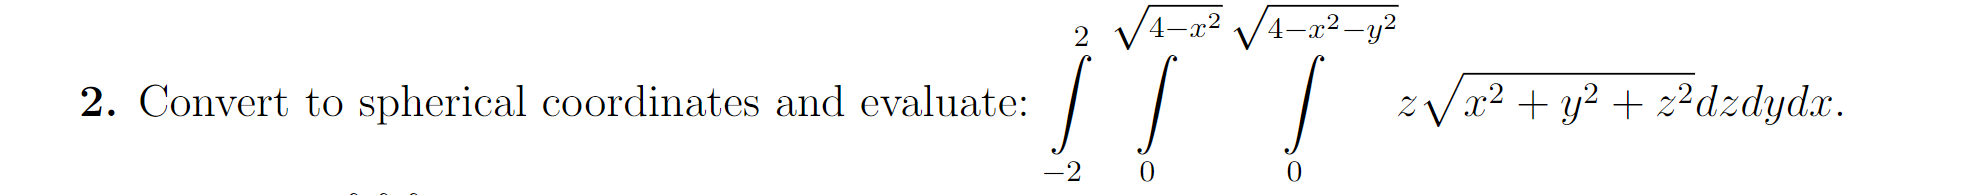 4-2 4-2-y2
zVa2y dzdydx
2. Convert to spherical coordinates and evaluate:
-2 0
